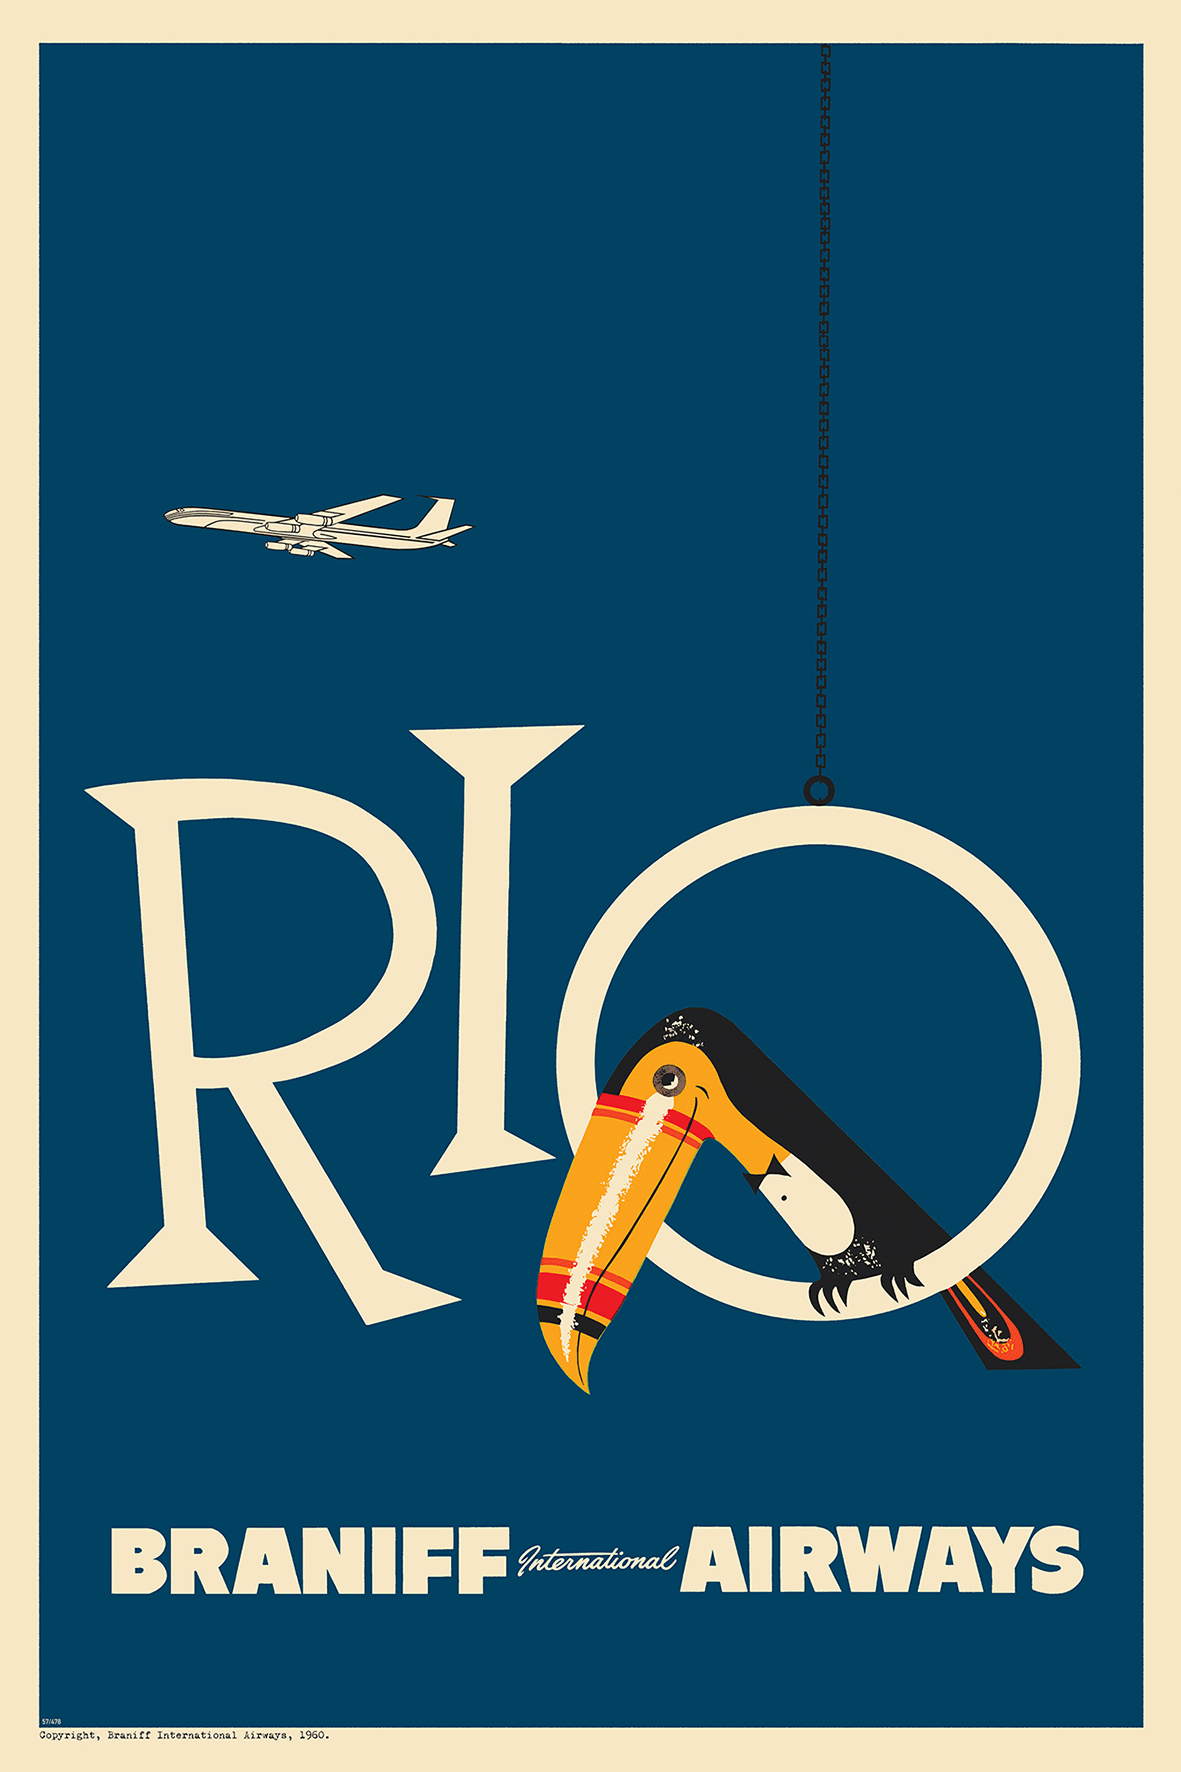 Braniff Rio Toucan Welcome to Brazil, 1959.